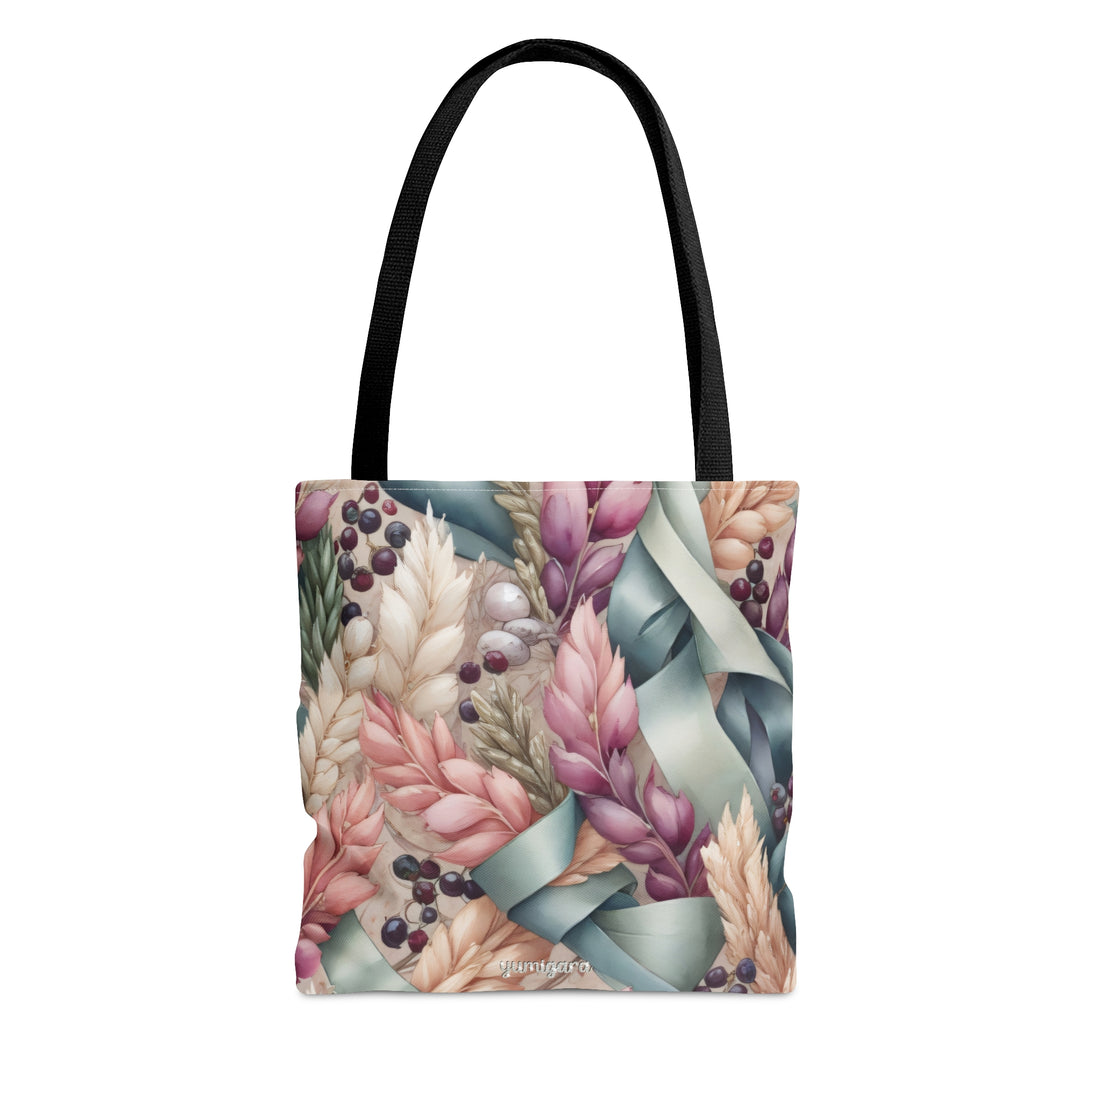 Sweet Delight and Dreams Luxury Shopping Tote Bag